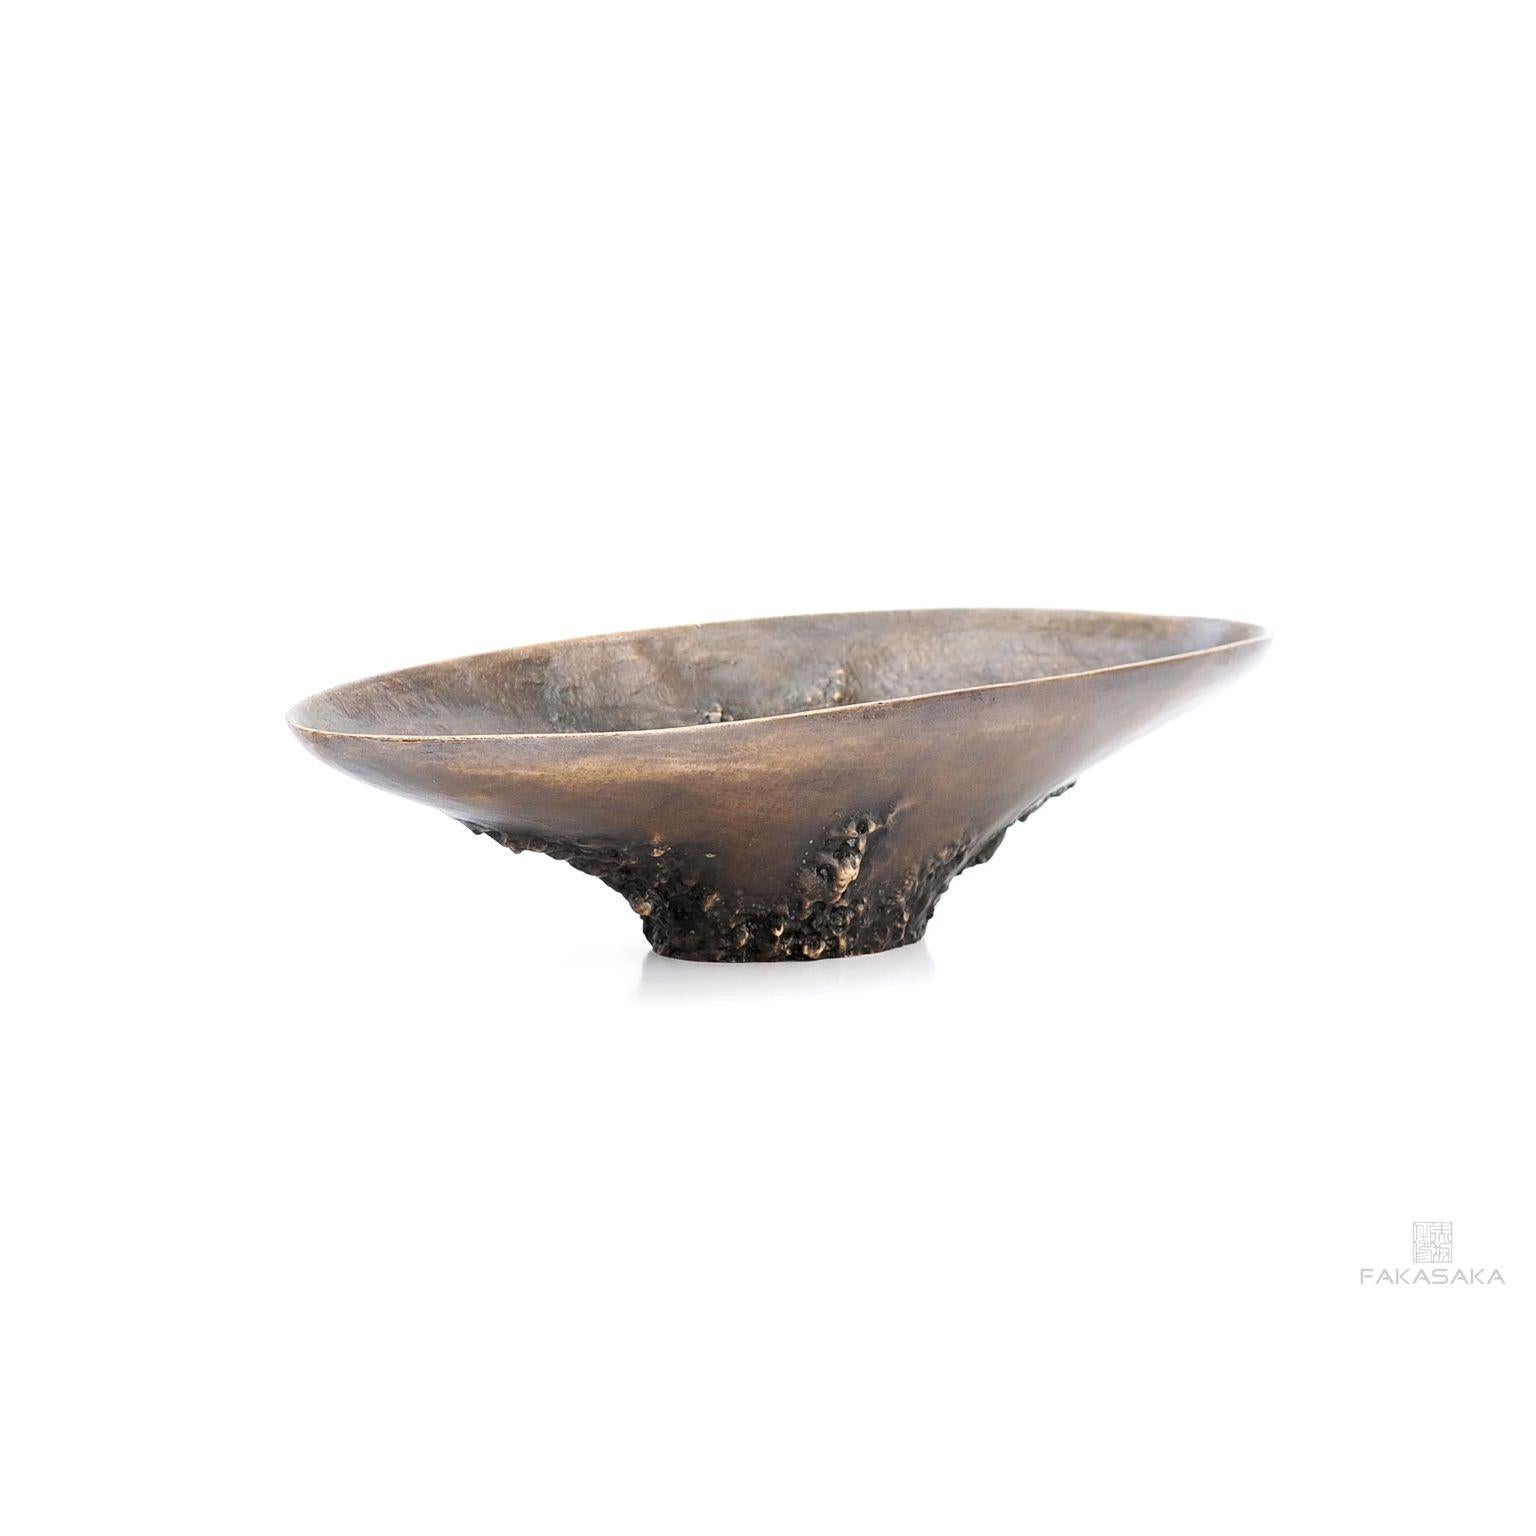 Other O'Connor Bowl by Fakasaka Design For Sale